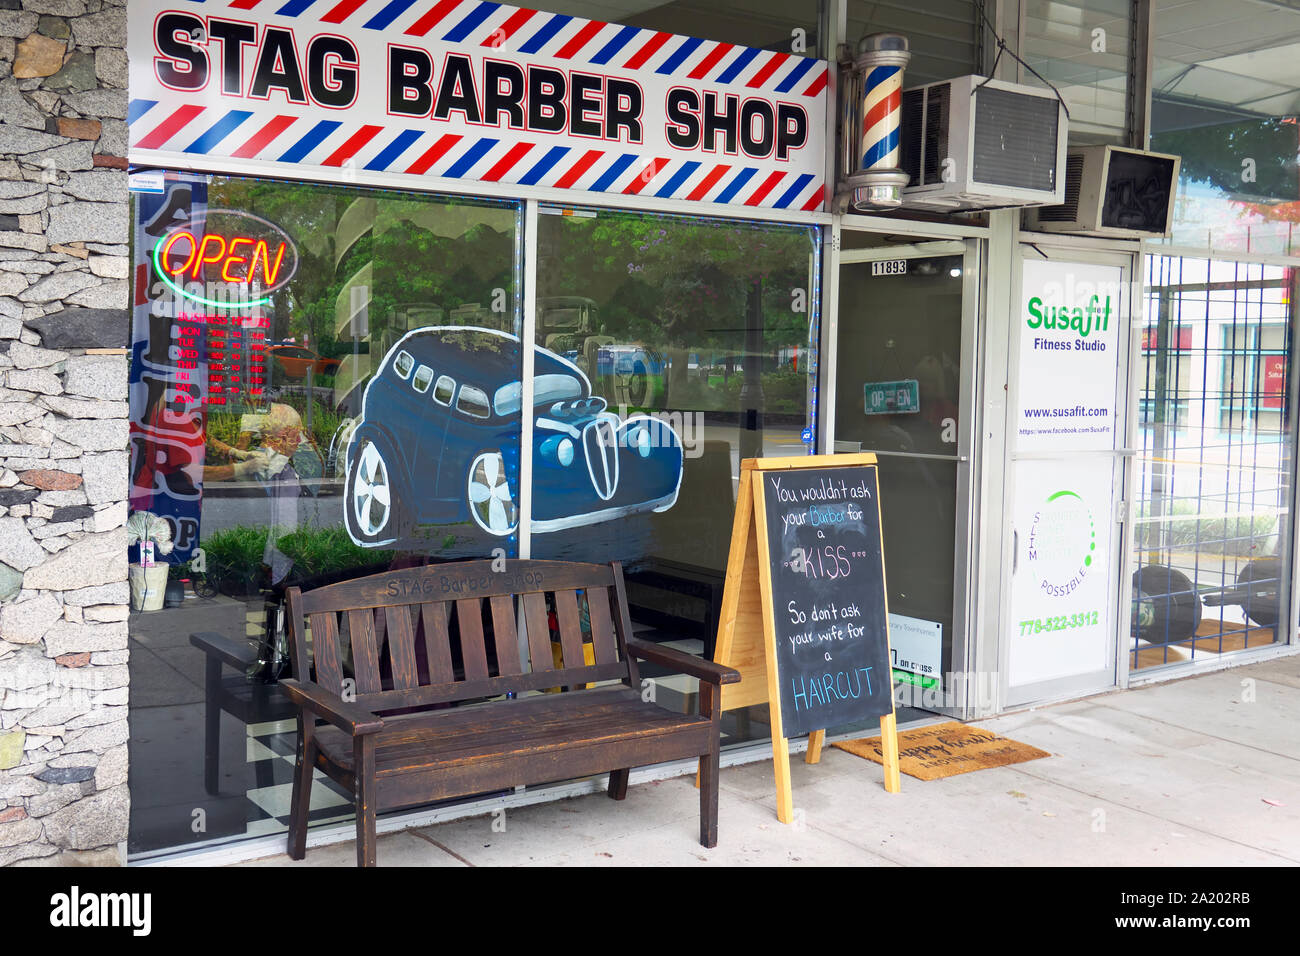 Stag Barber Shop shop window with a chalk board and bench on the sidewalk.  Maple Ridge, British Columbia, Canada. Stock Photo